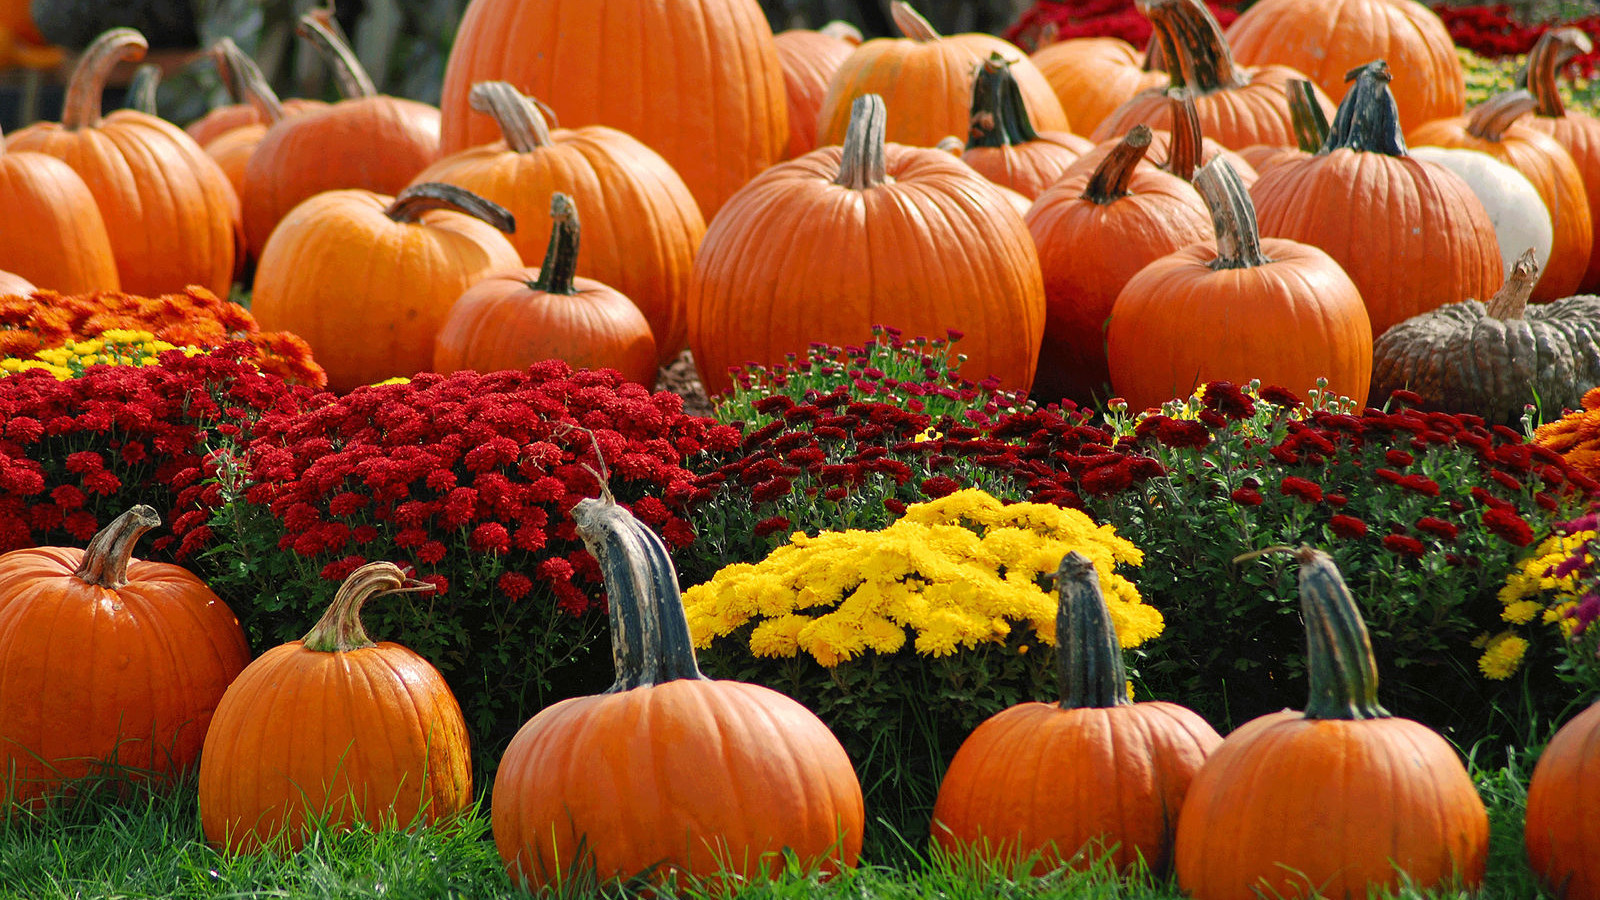 List of Middle Tennessee farms and pumpkin patches to visit this fall